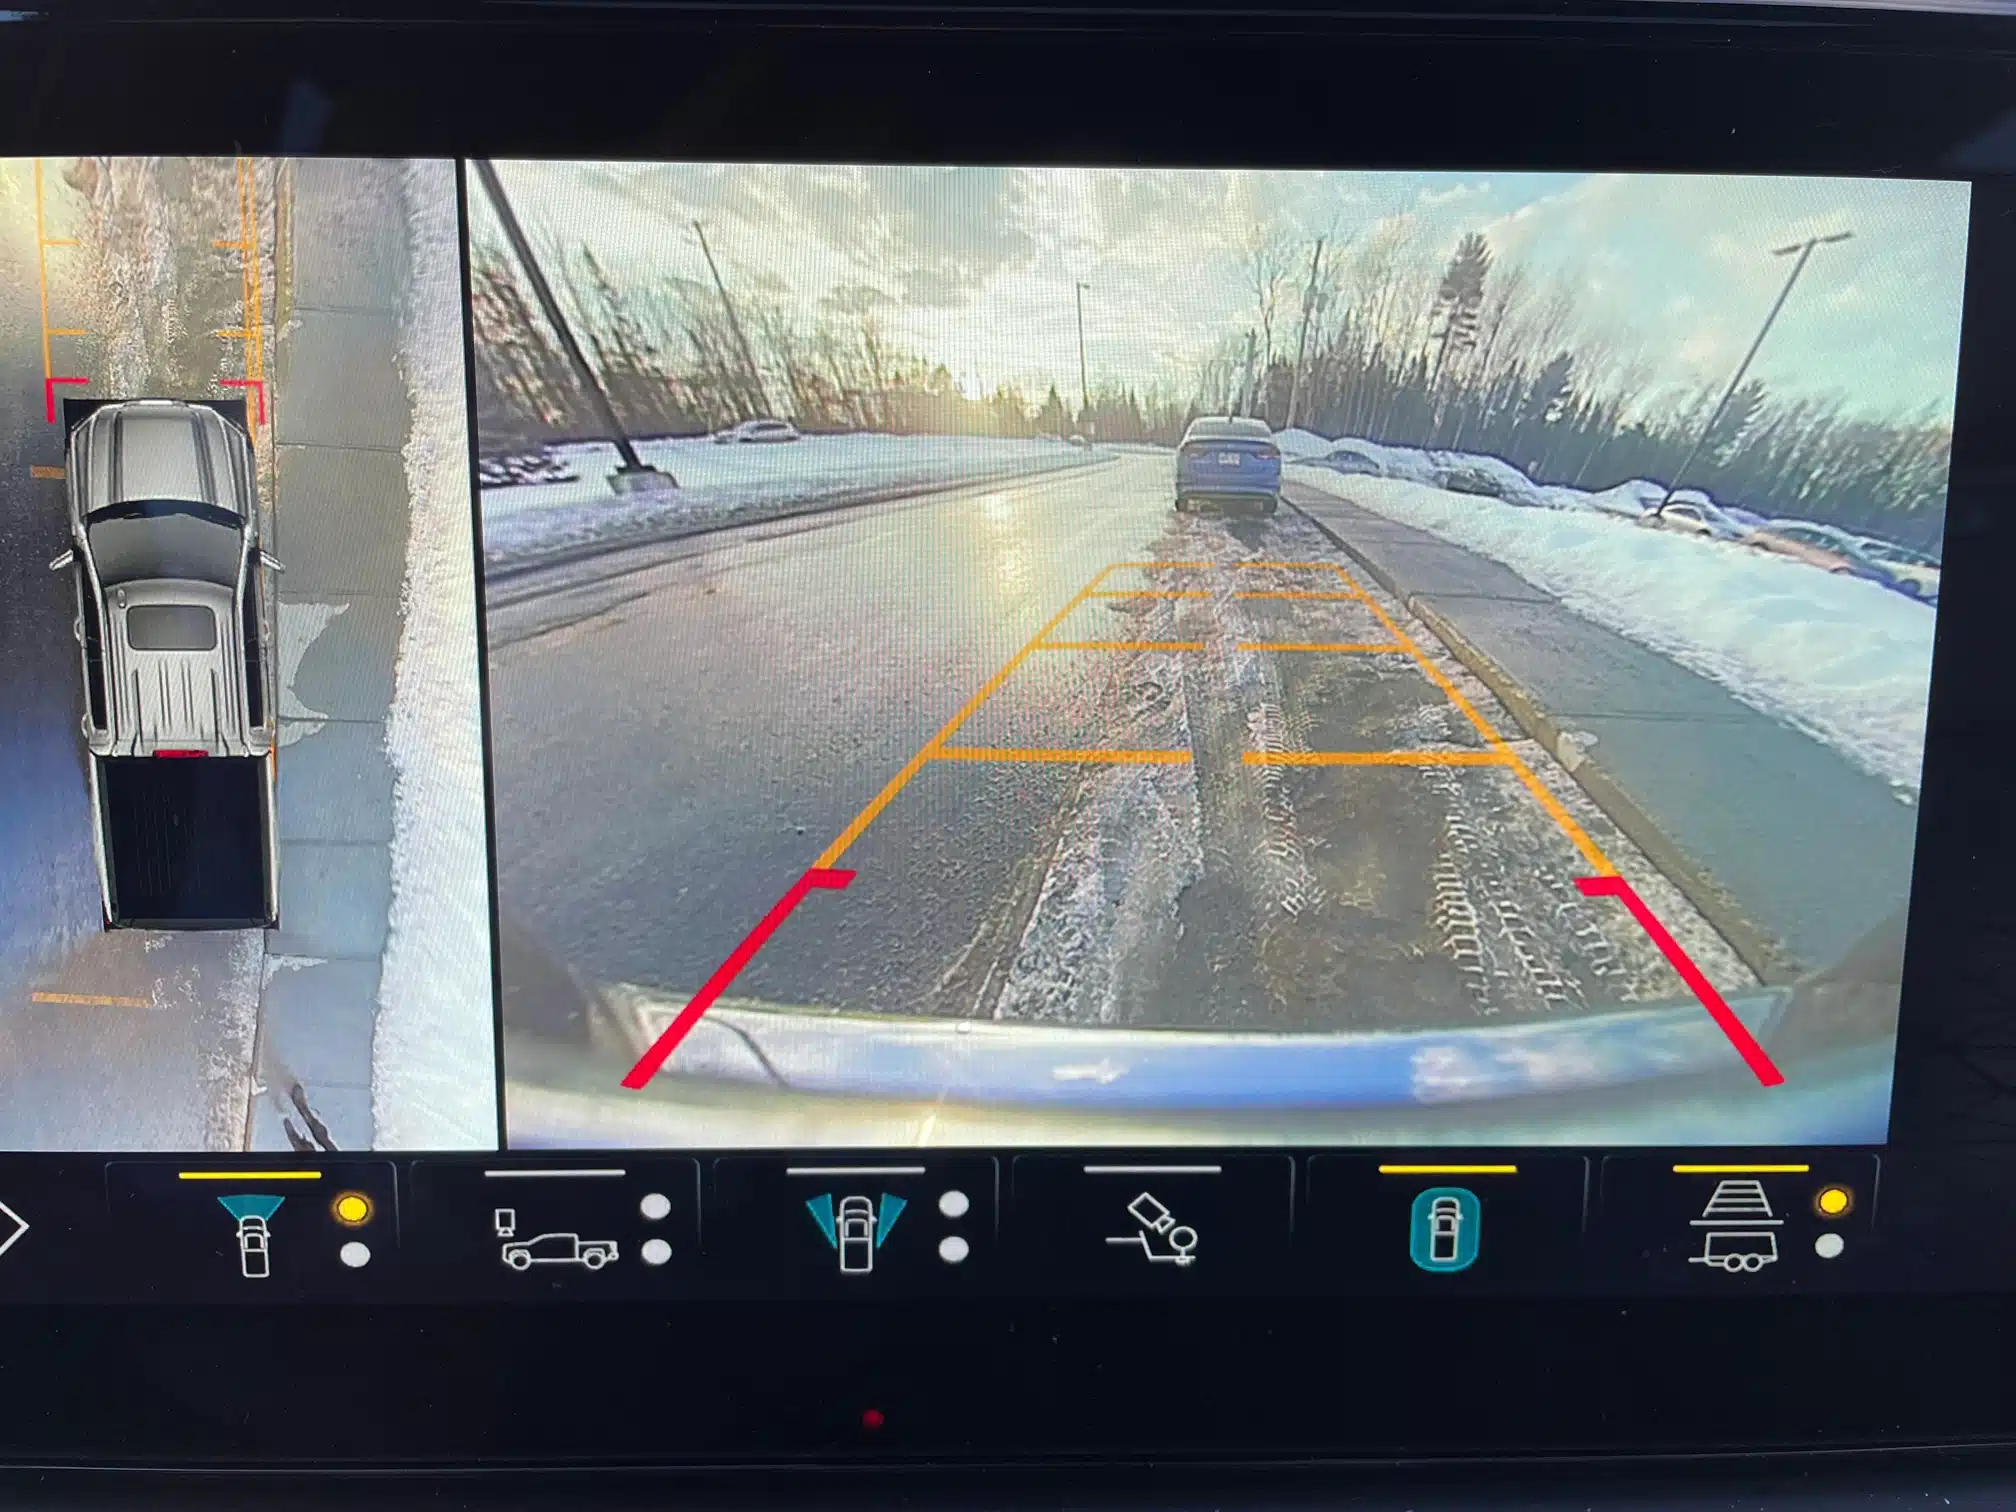 The cameras are just one of many gadgets on the truck